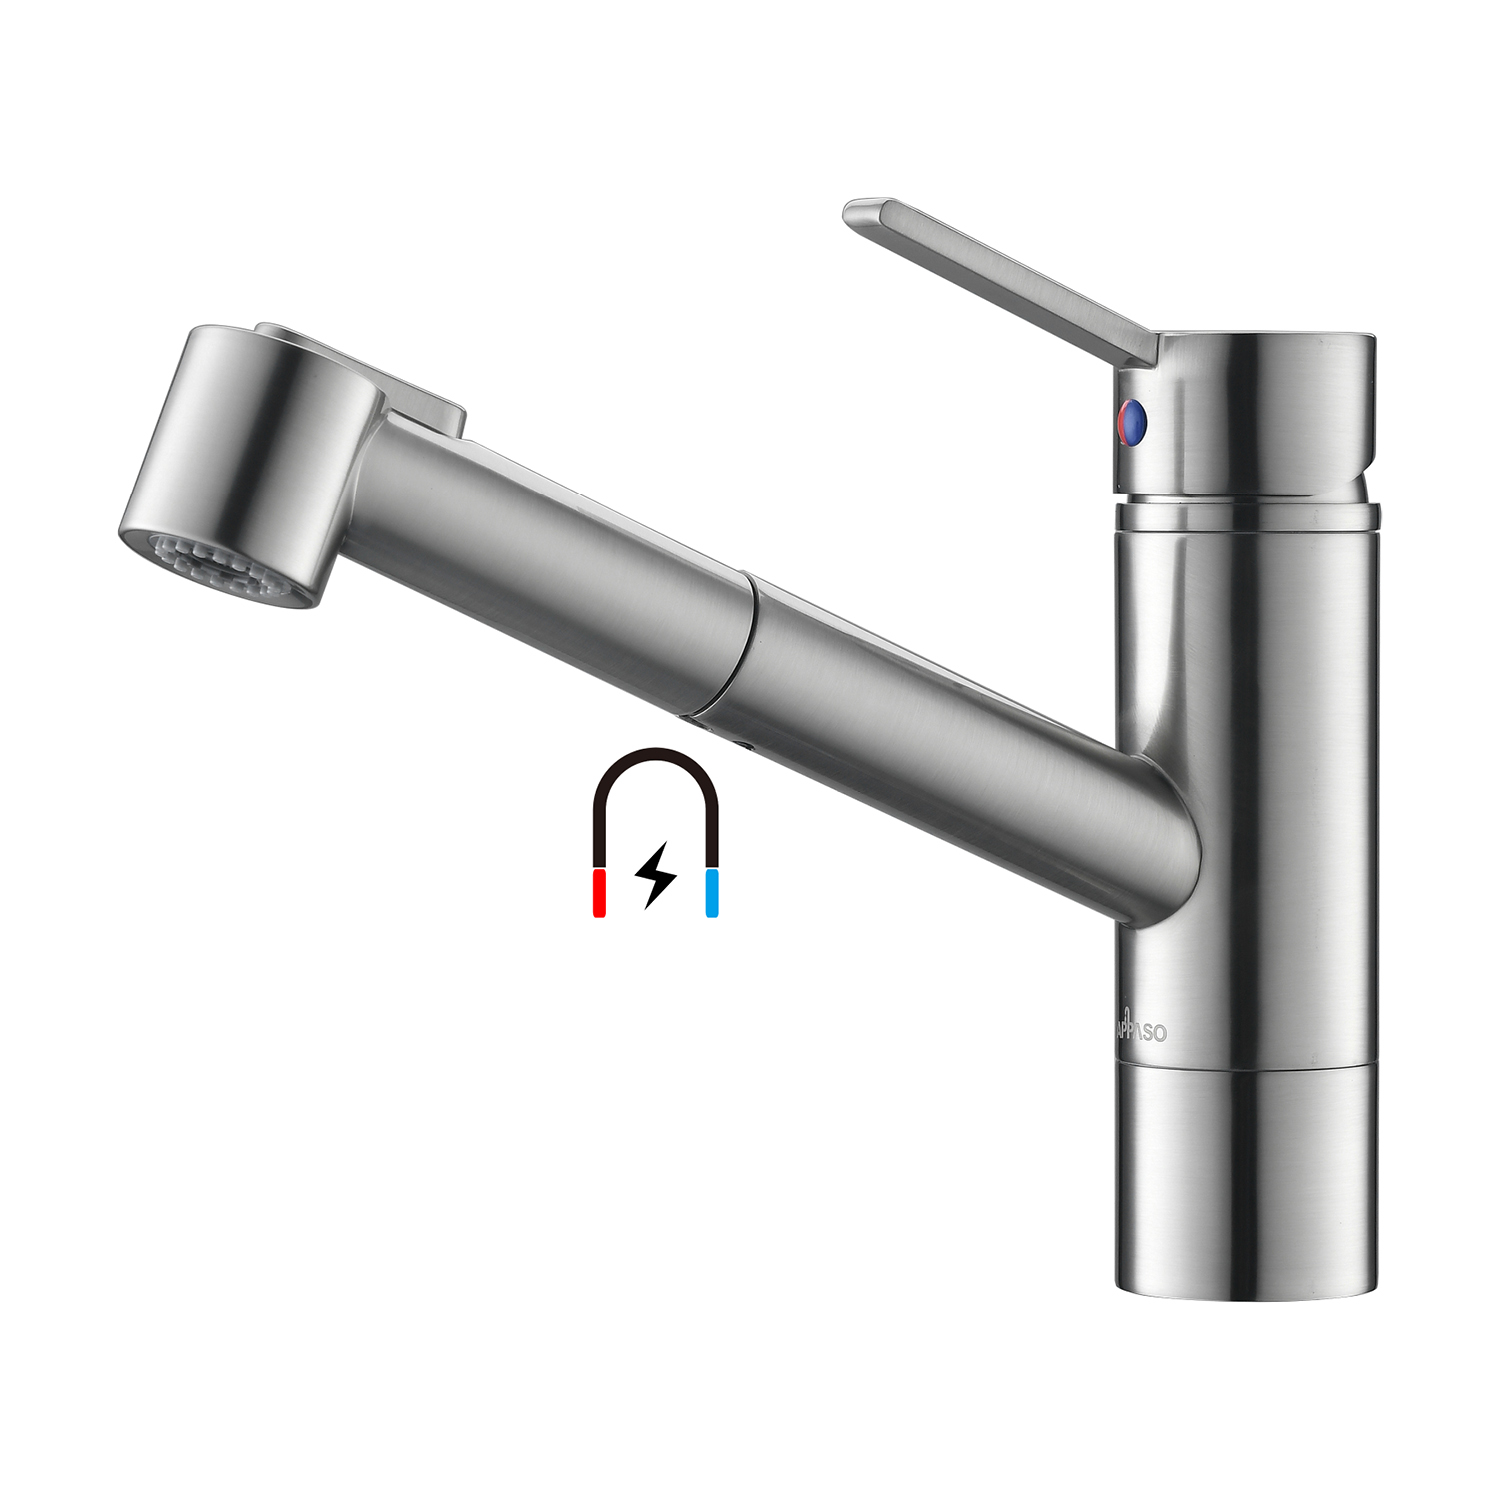 Hot Sale Factory Manufacture Single Handle Chrome Brass Sink Mixer Faucet Pull Down Spray Kitchen Faucet